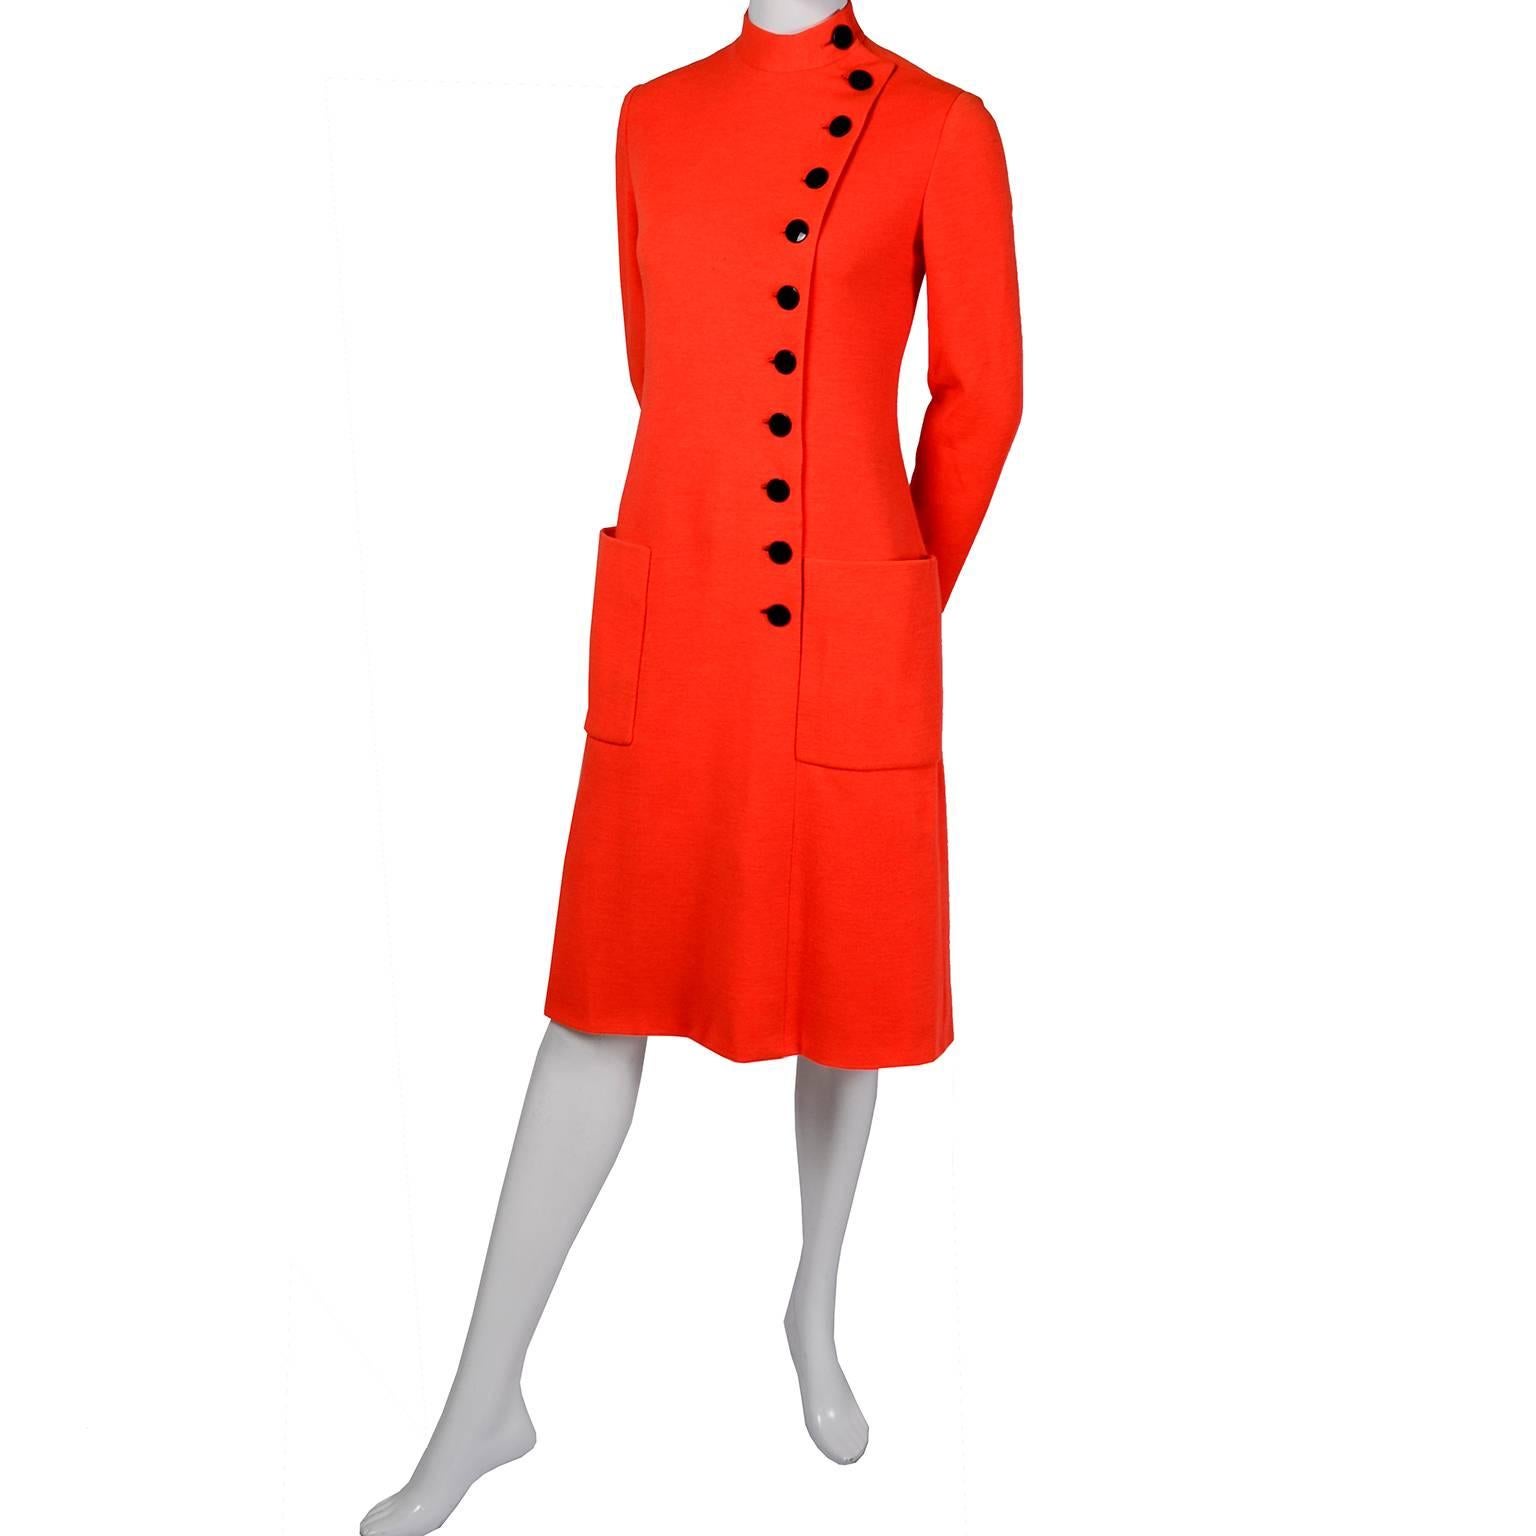 This 1960's vintage Norman Norell dress has front patch pockets, a belt and black buttons aligned off center up the front. The dress is in a tangerine orange knit with the famous impeccably tailored Norell lining and the belt is stamped Norman